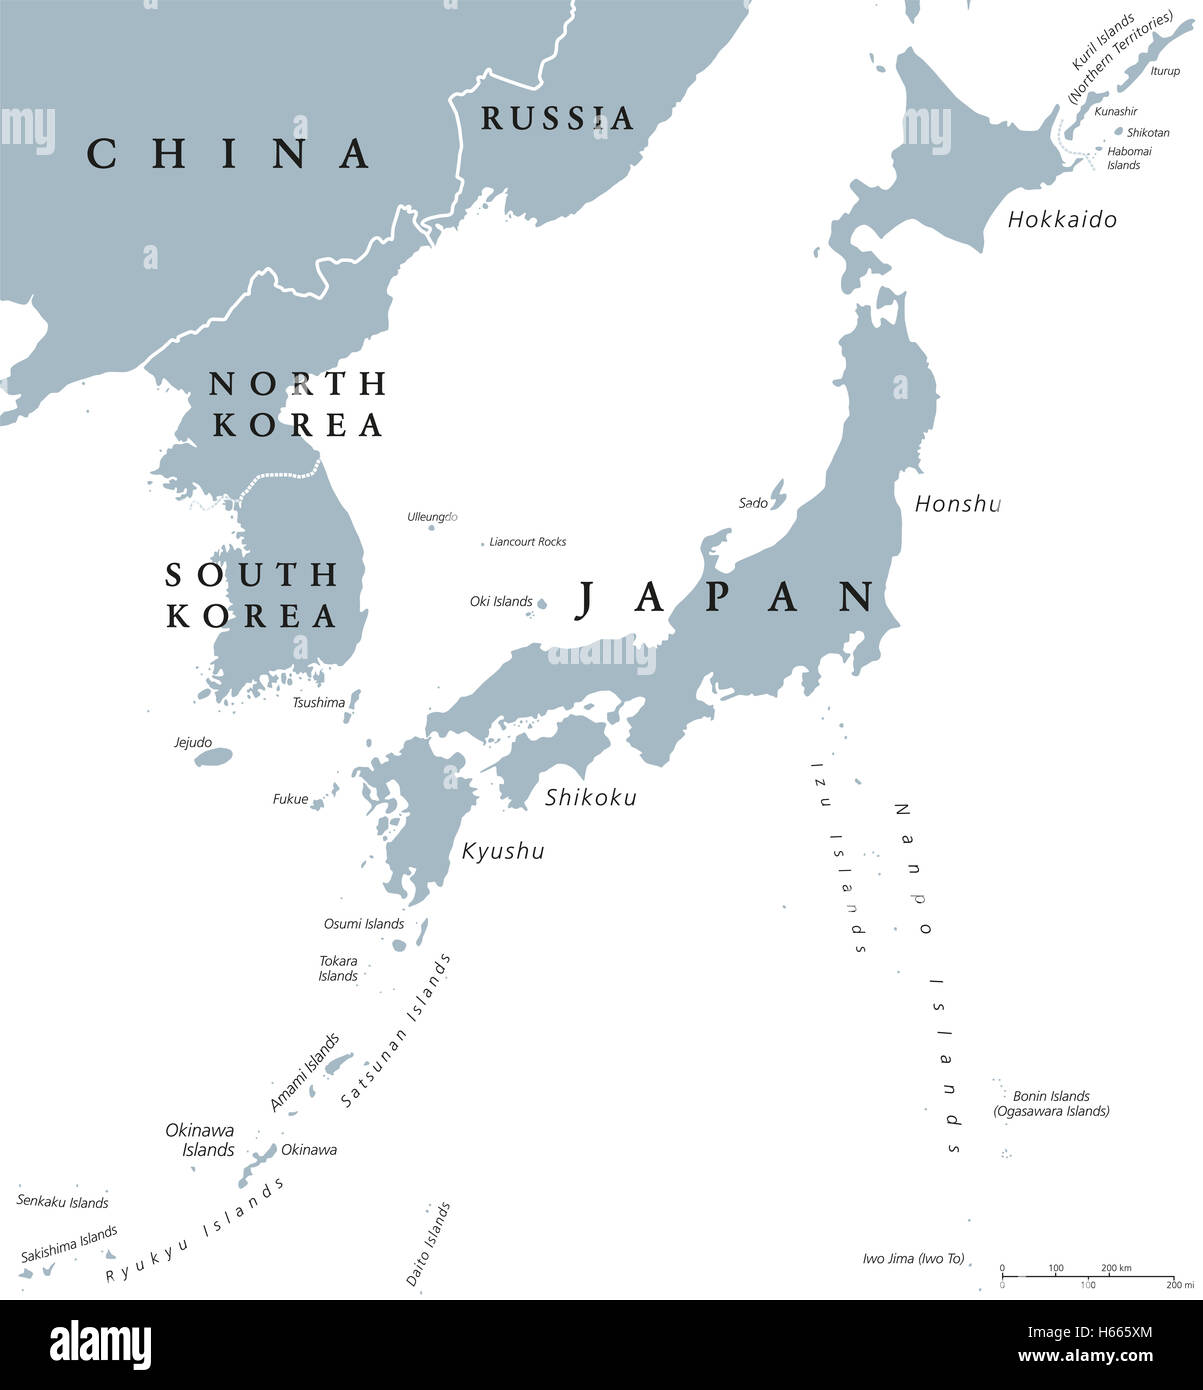 Korean Peninsula And Japan Countries Political Map With National